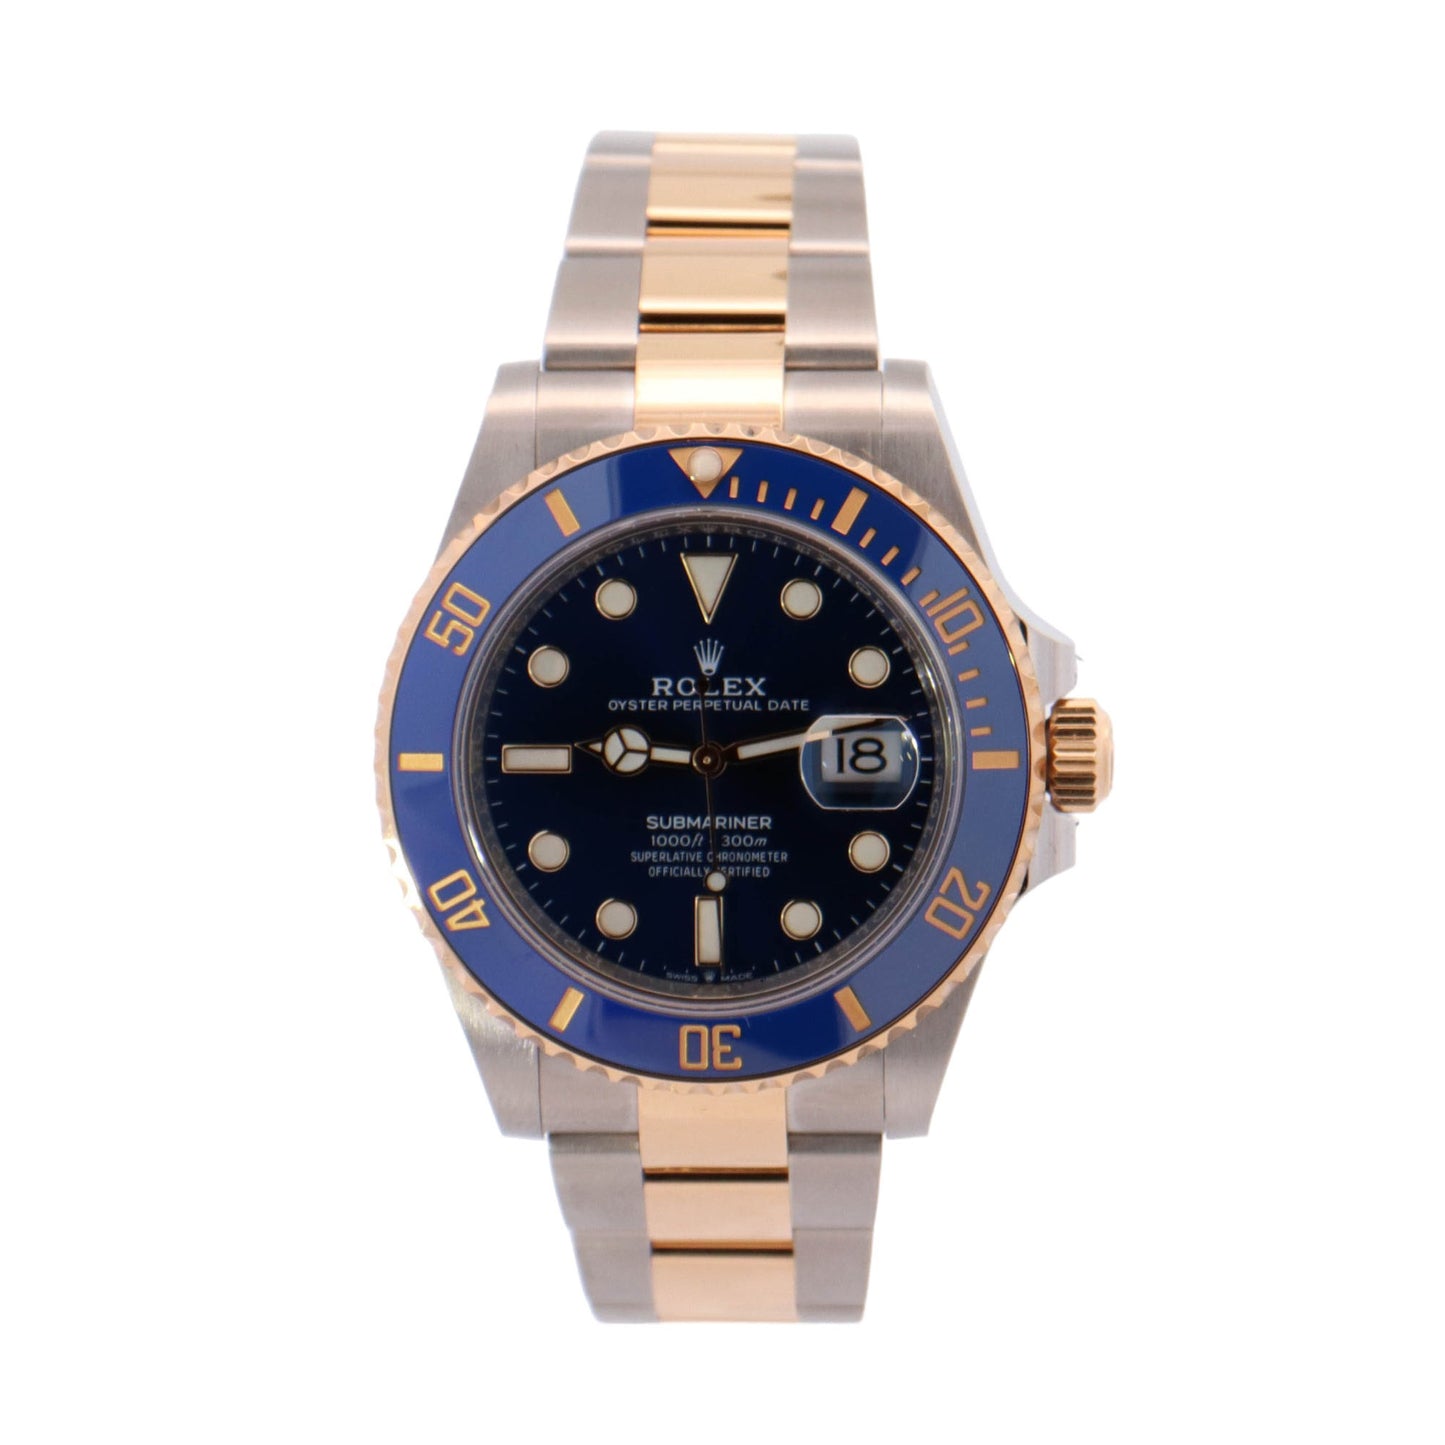 Rolex Submariner Two-Tone Stainless Steel & Yellow Gold 41mm Blue Dot Dial Watch Reference #: 126613LB - Happy Jewelers Fine Jewelry Lifetime Warranty